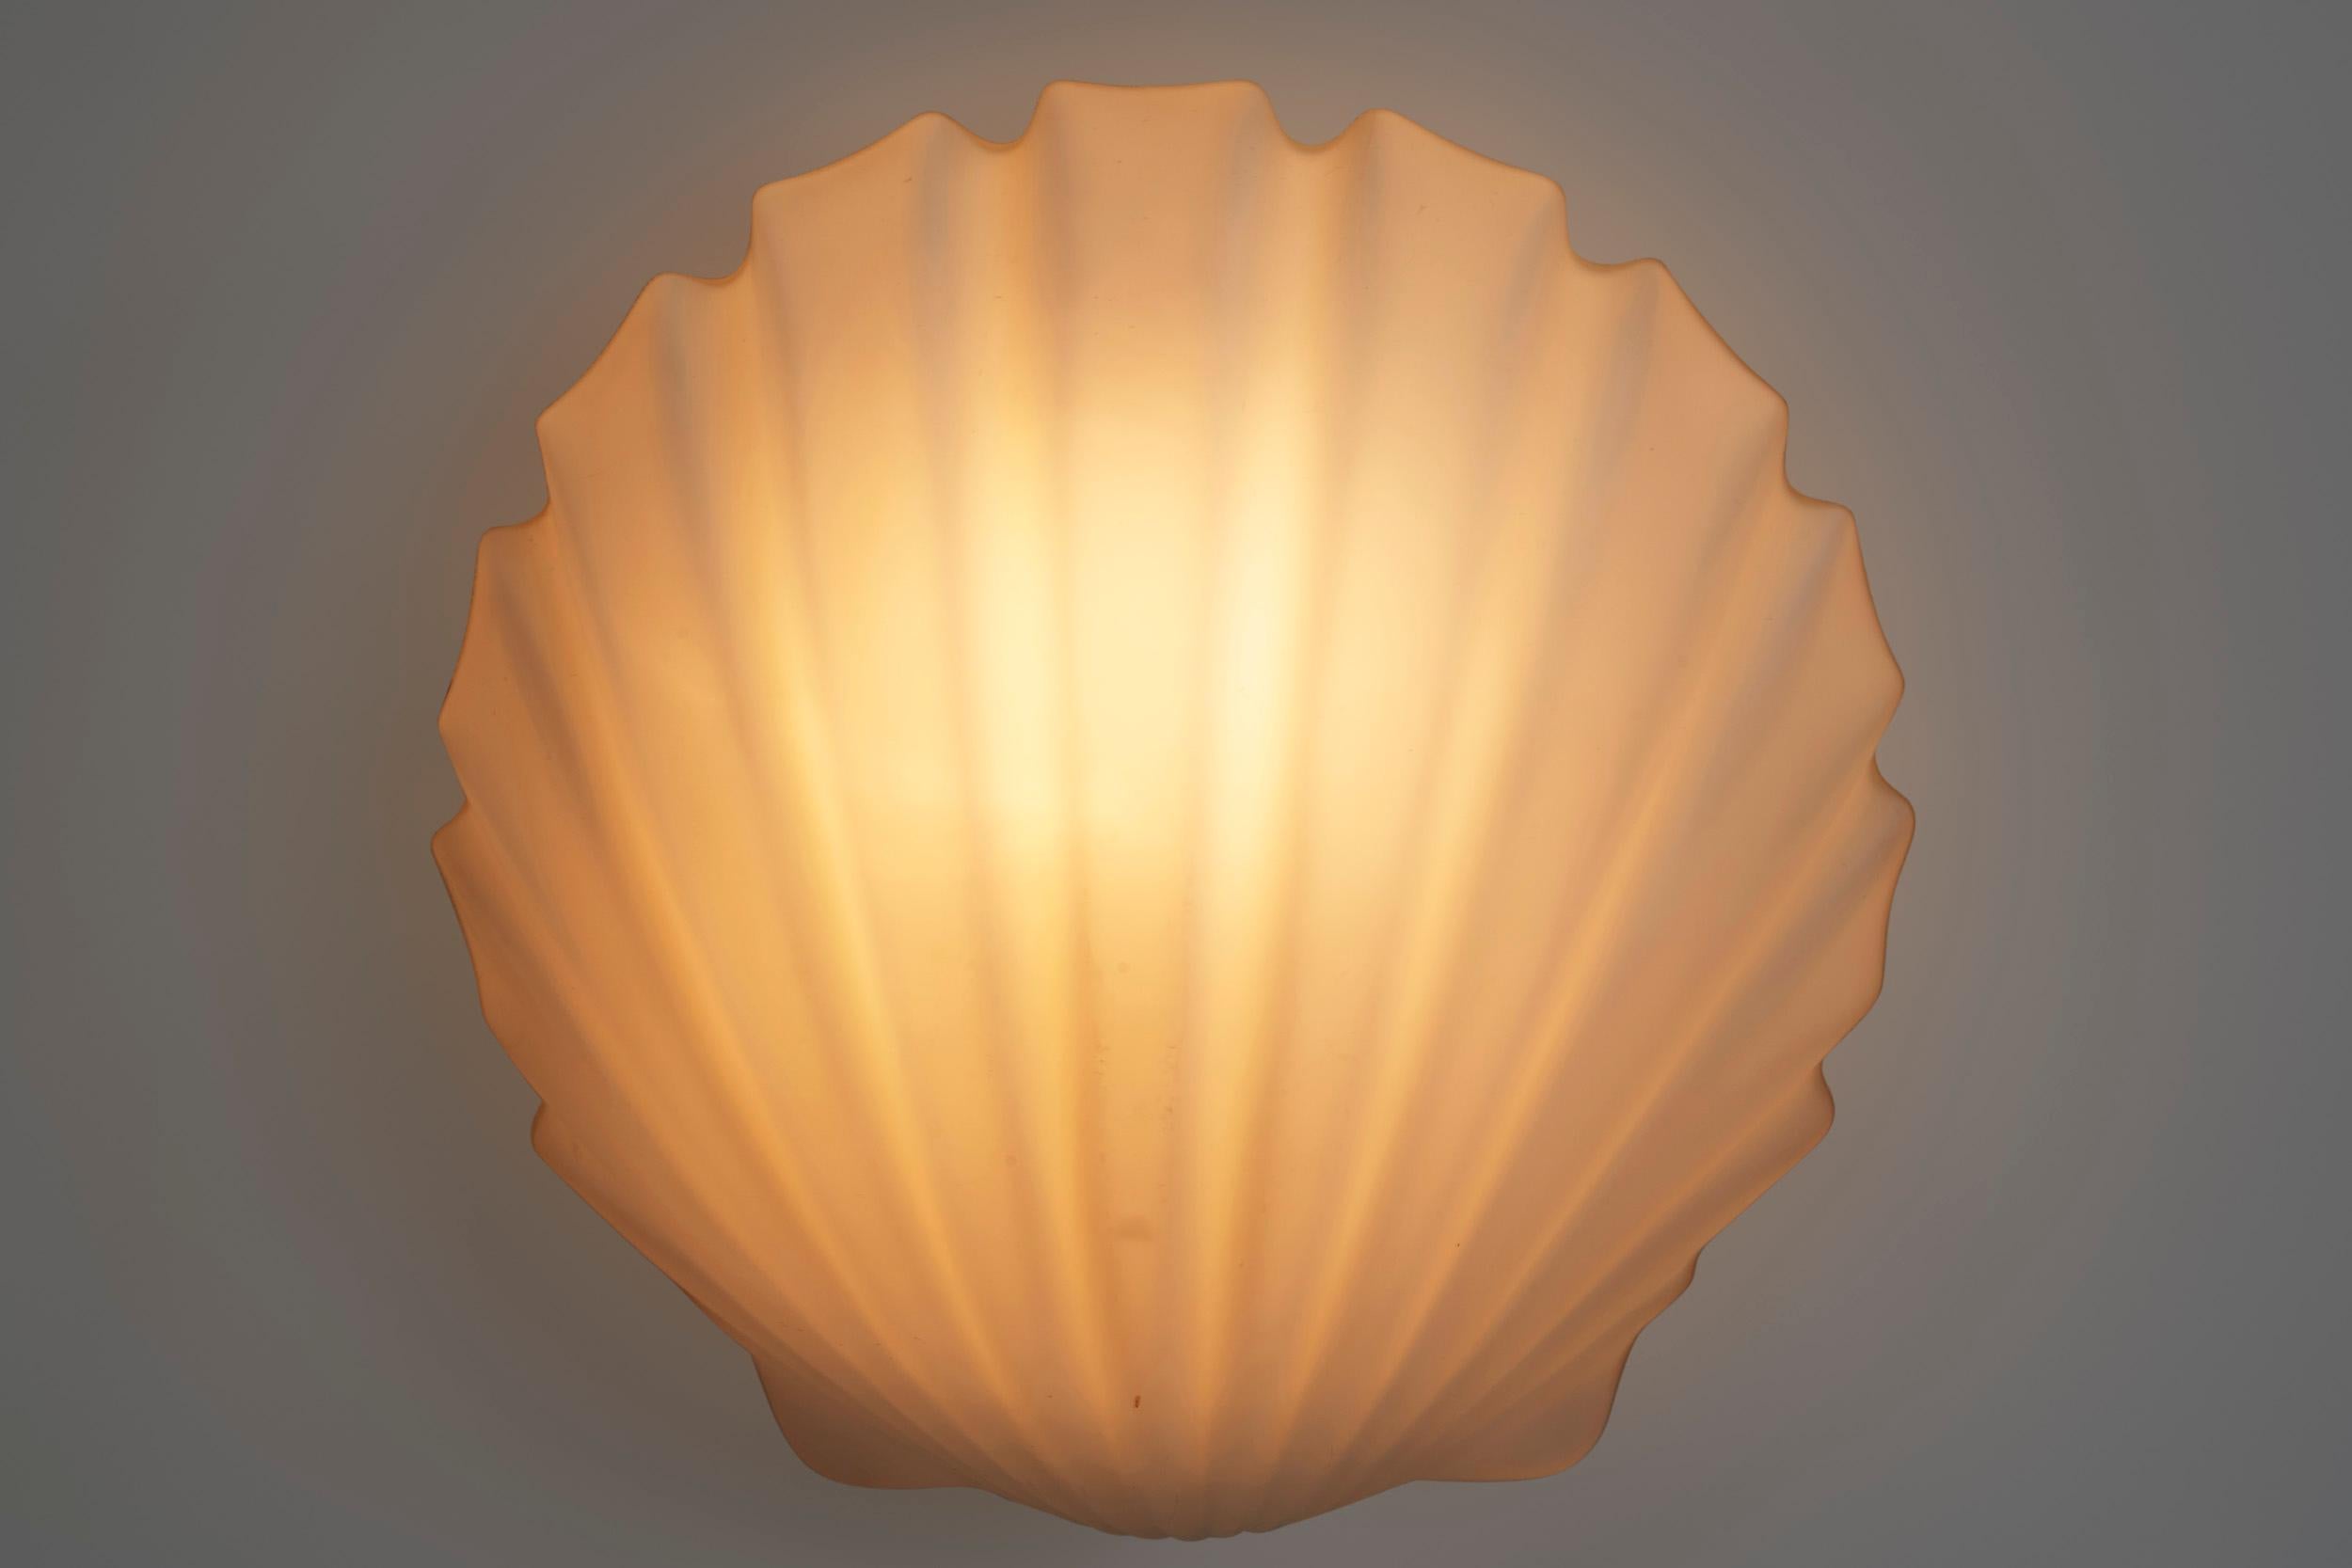 Pair of Opal Glass Seashell Wall Lamps by Glashütte Limburg, Germany 1970s For Sale 3